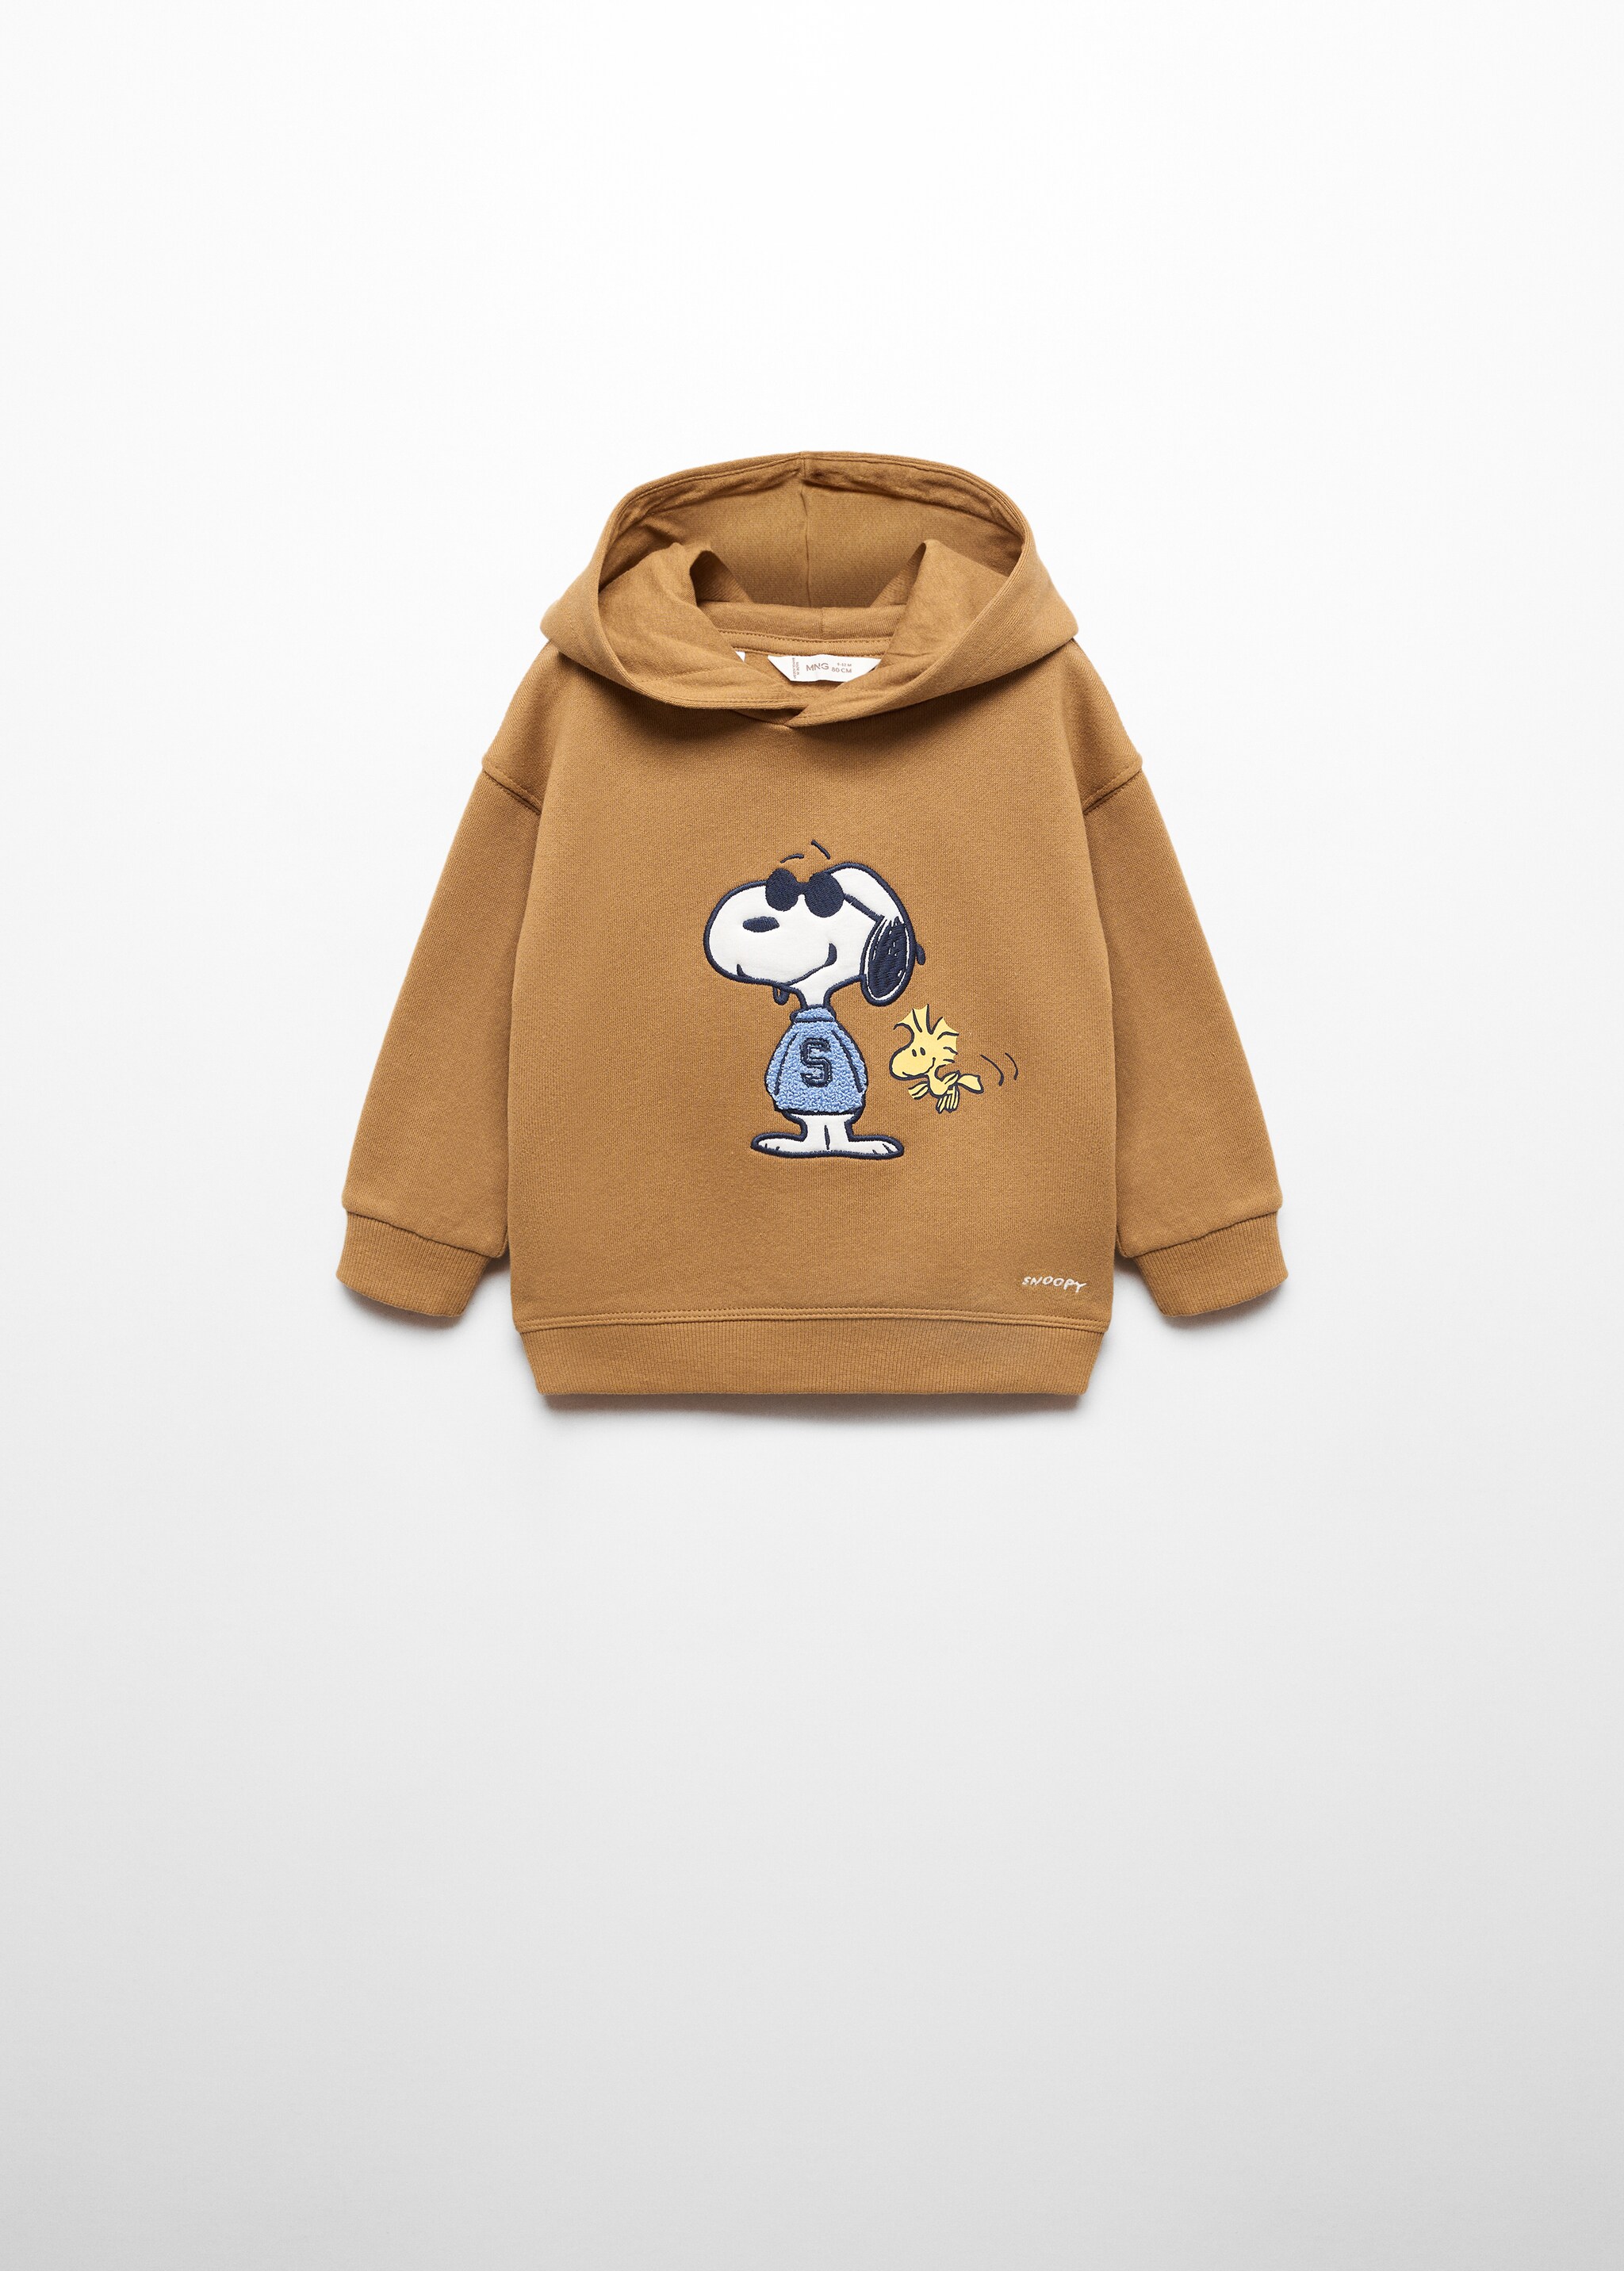 Snoopy textured sweatshirt - Article without model